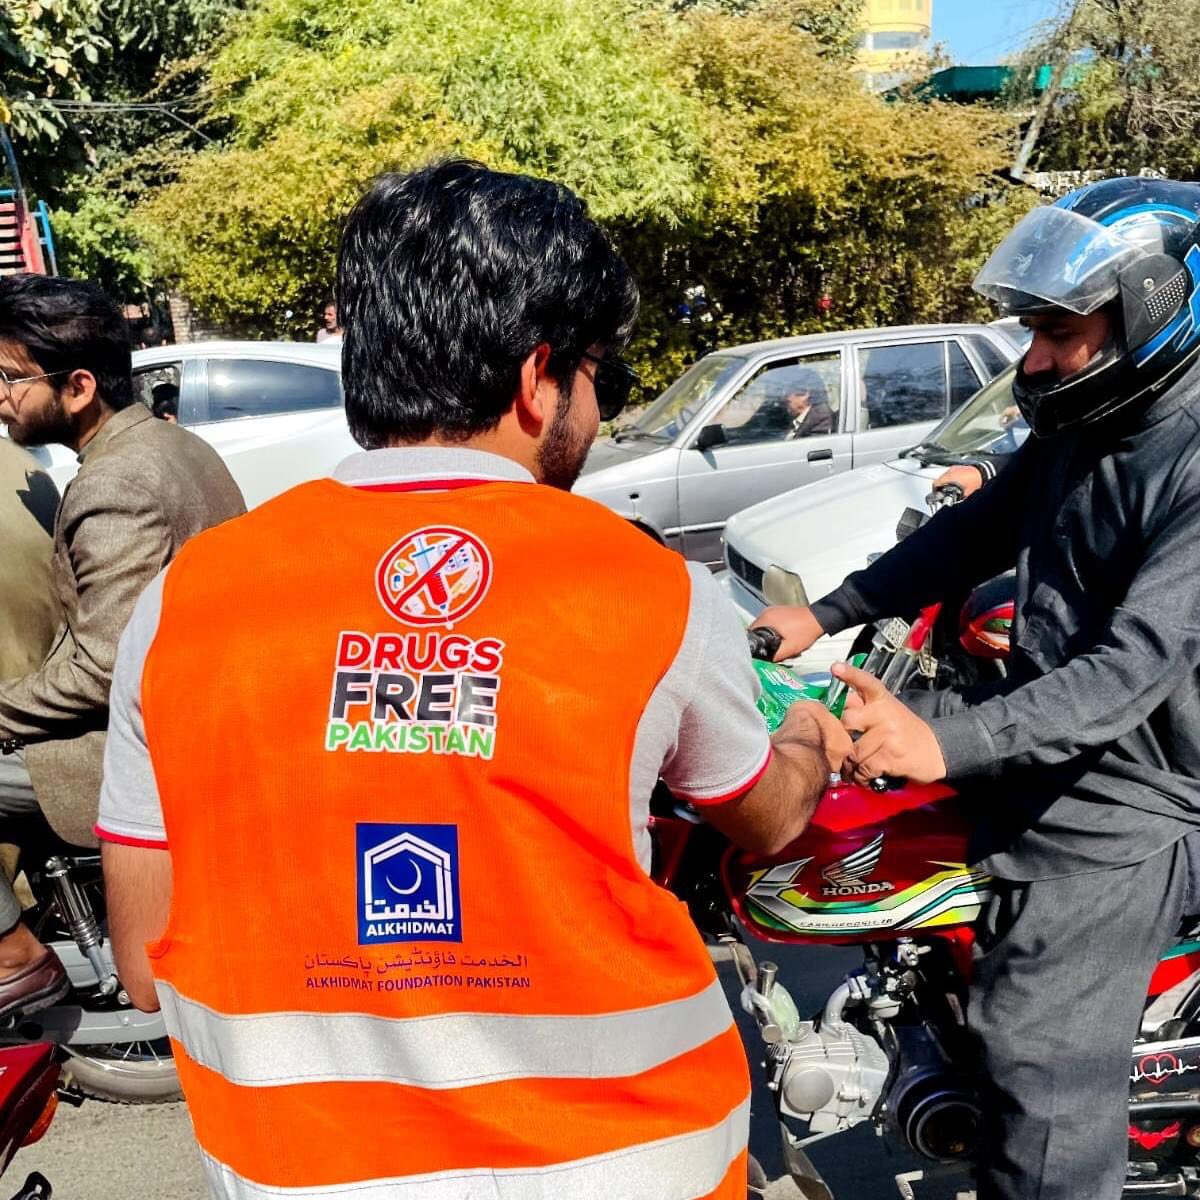 'The Alkhidmat Foundation has launched the 'Drug-Free Pakistan' campaign nationwide. Let's kick drugs out of our society! 💪🚫💊 #DrugFreePakistan ❌💉 #HealthyNation 🇵🇰'